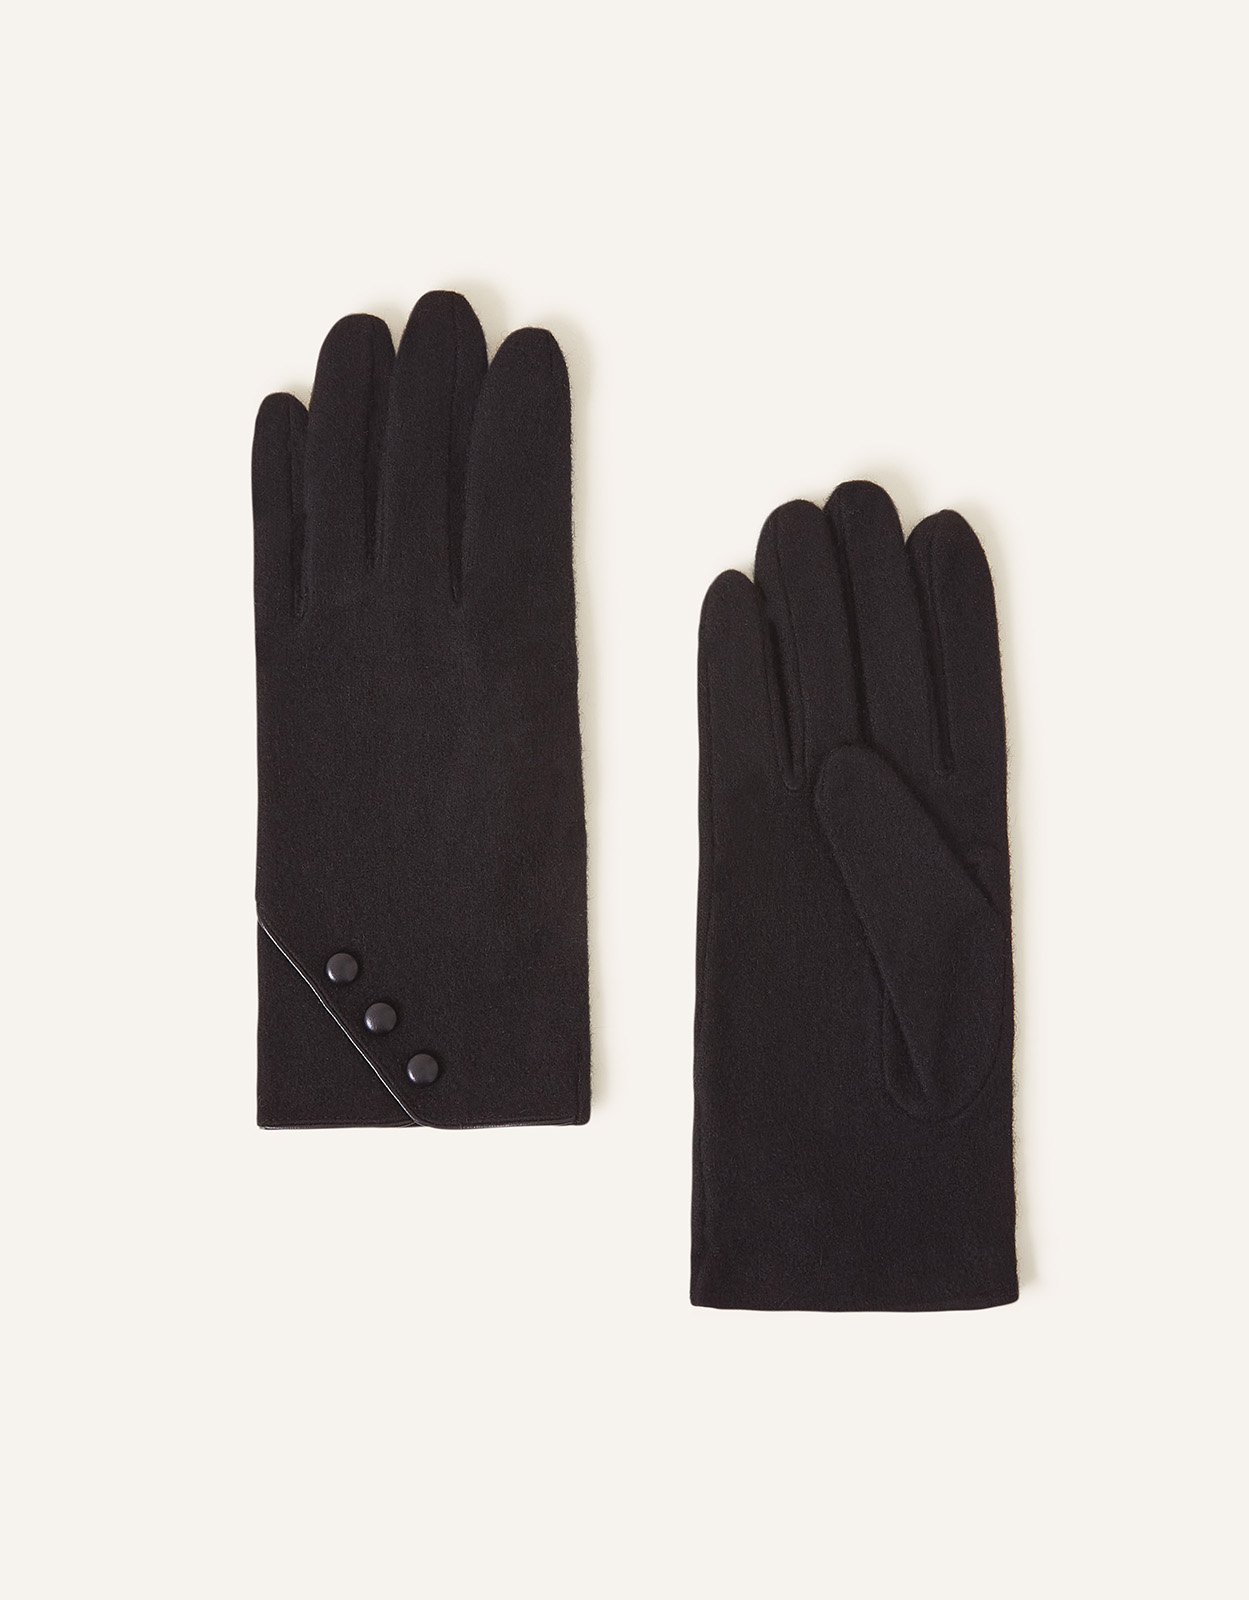 Accessorize Touchscreen Button Gloves in Wool Blend Black, Size: One Size